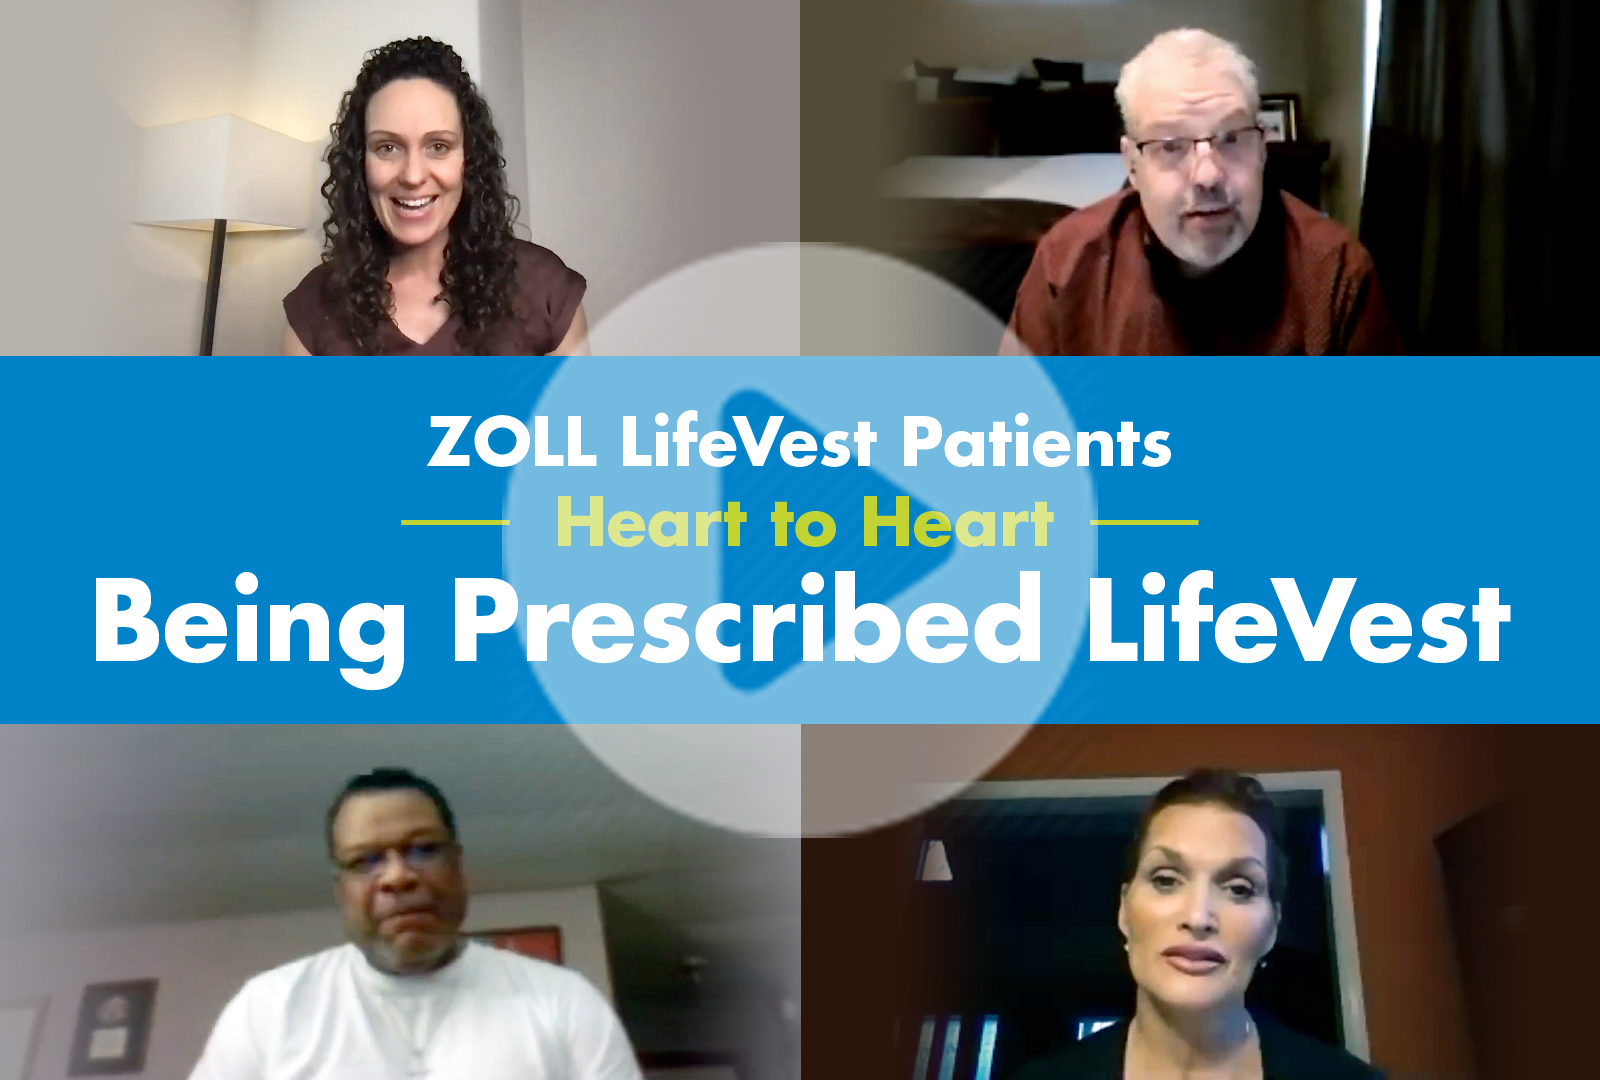 Play the Being Prescribed LifeVest Video